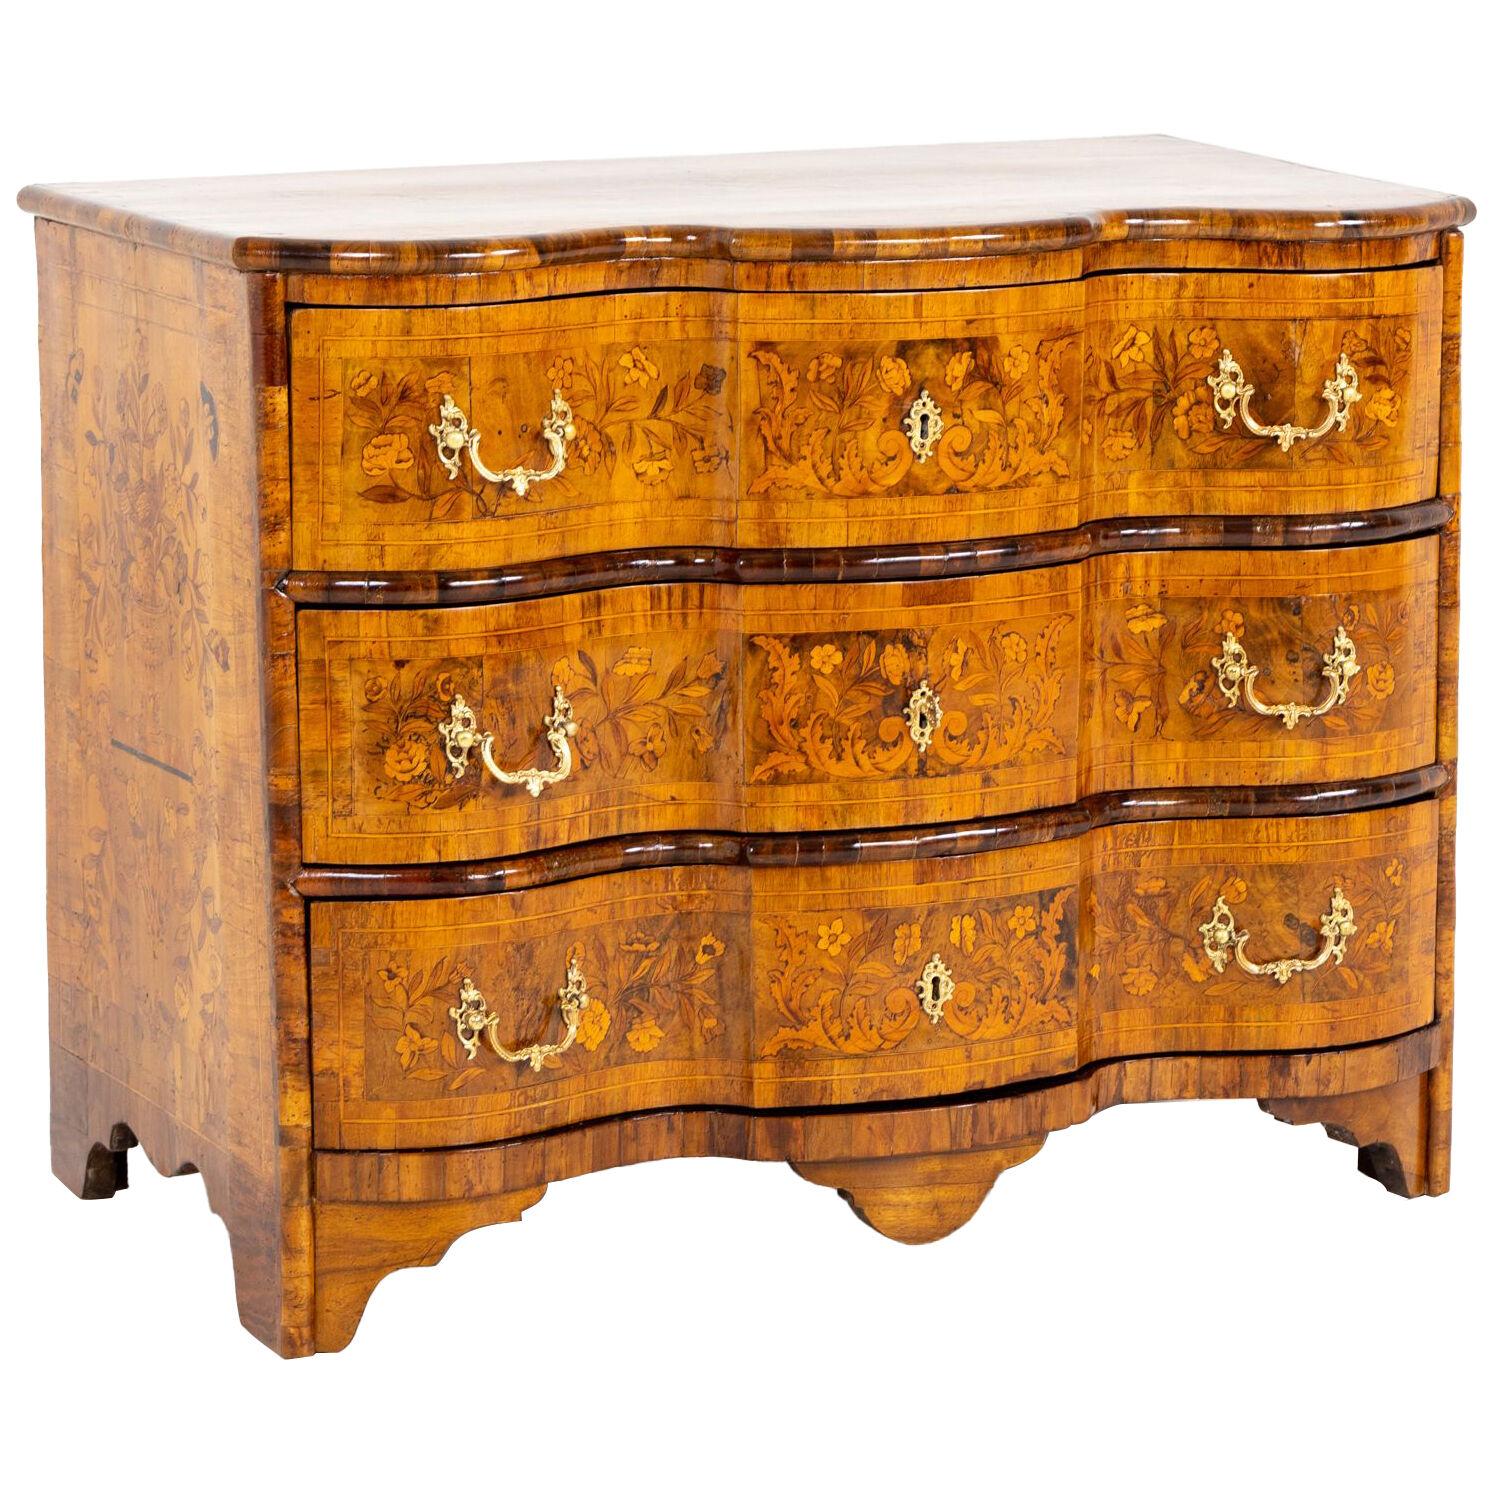 Dutch Baroque Chest of Drawers, 18th Century